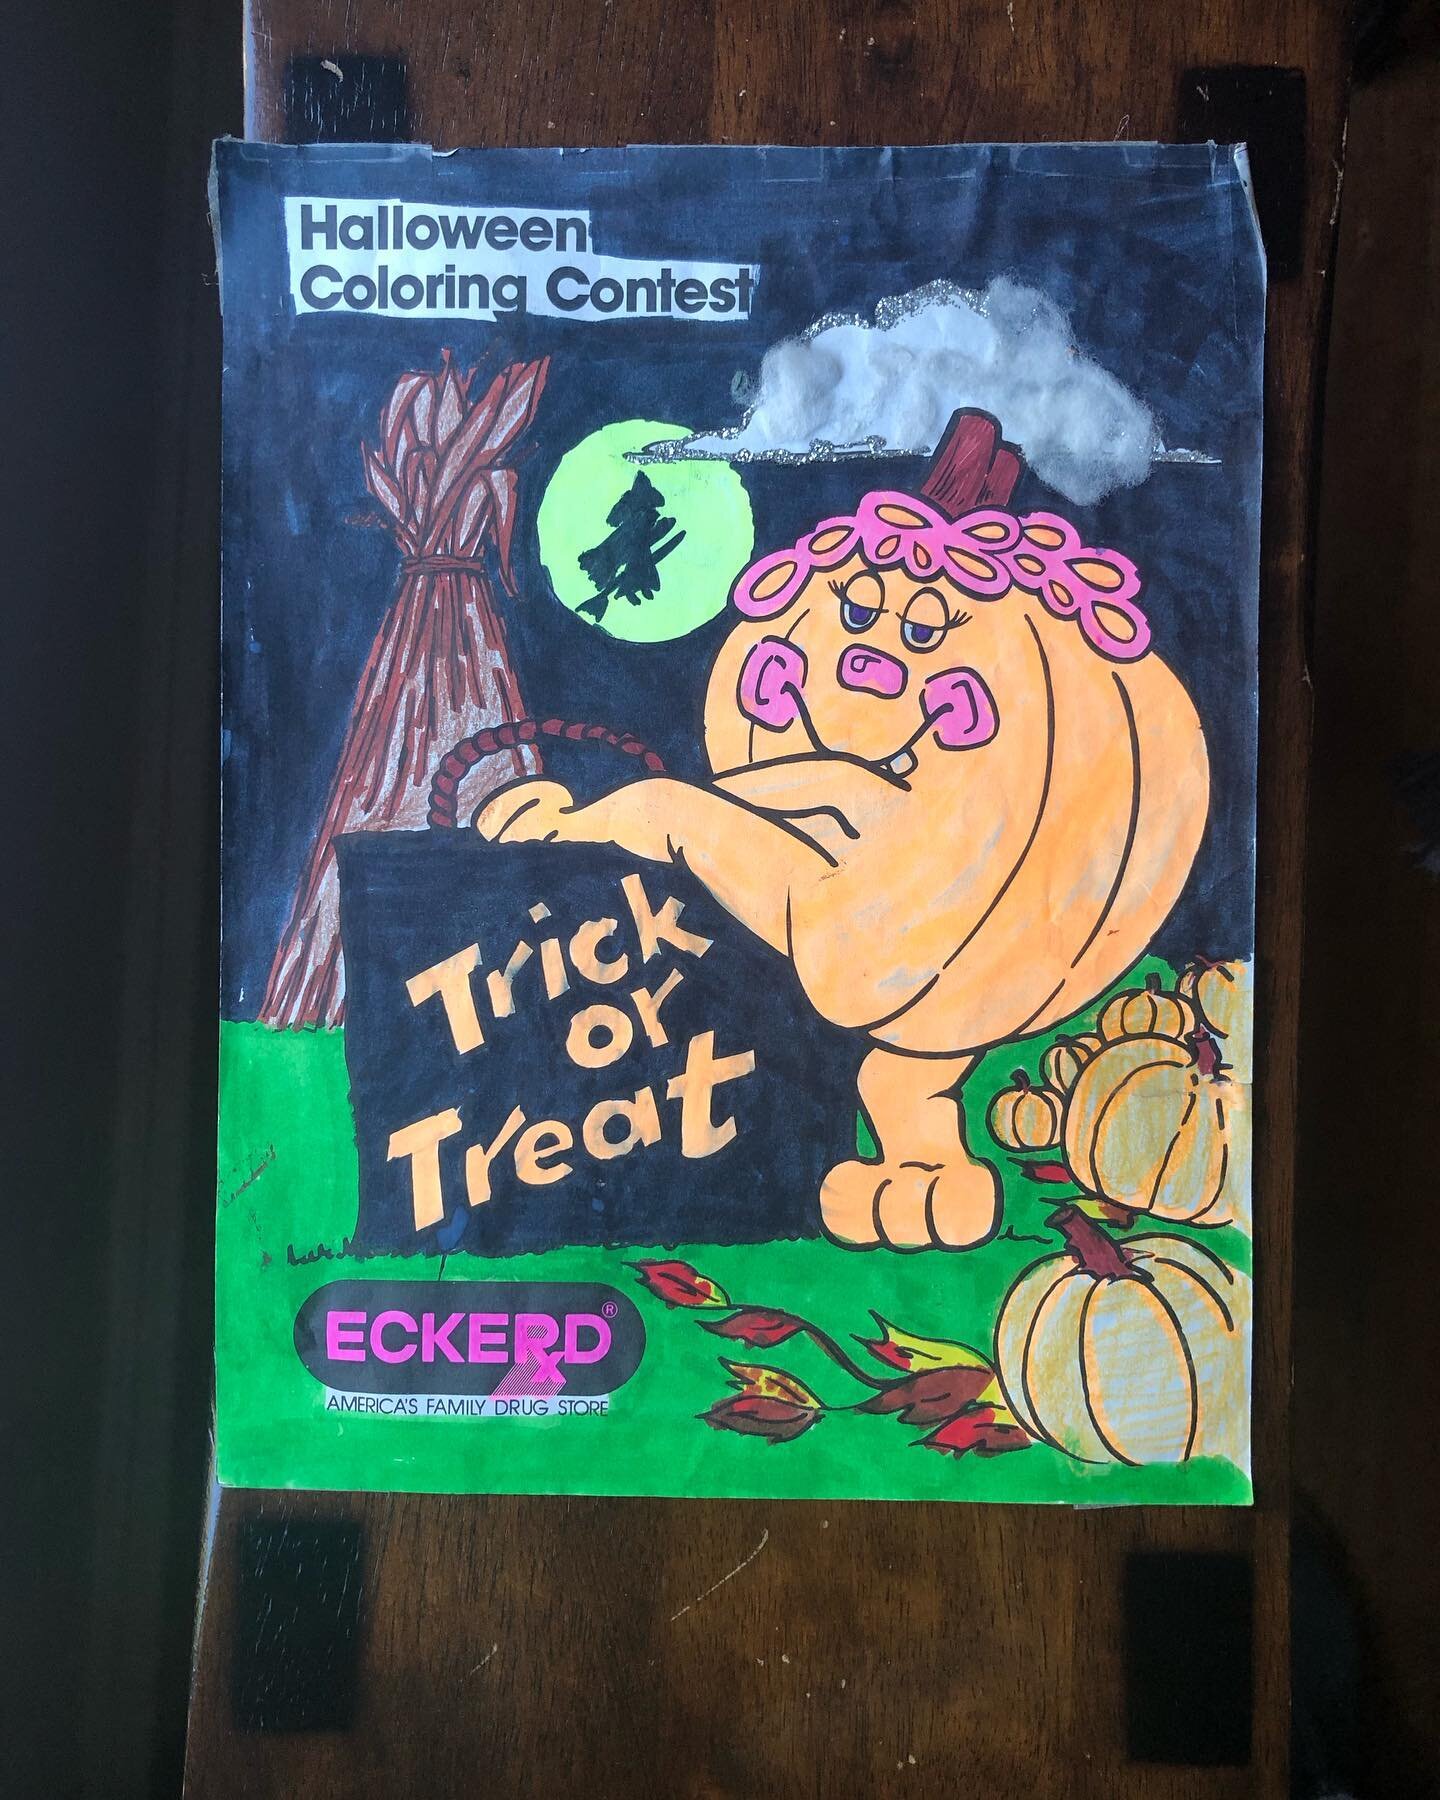 Who remembers drug store coloring contests? Bonus points if it's a drug store that doesn't exist anymore, like Eckerd, America's Family Drug Store, the sponsor of this one in 1989.

I'm not a visual artist. But I did win the only visual art competiti